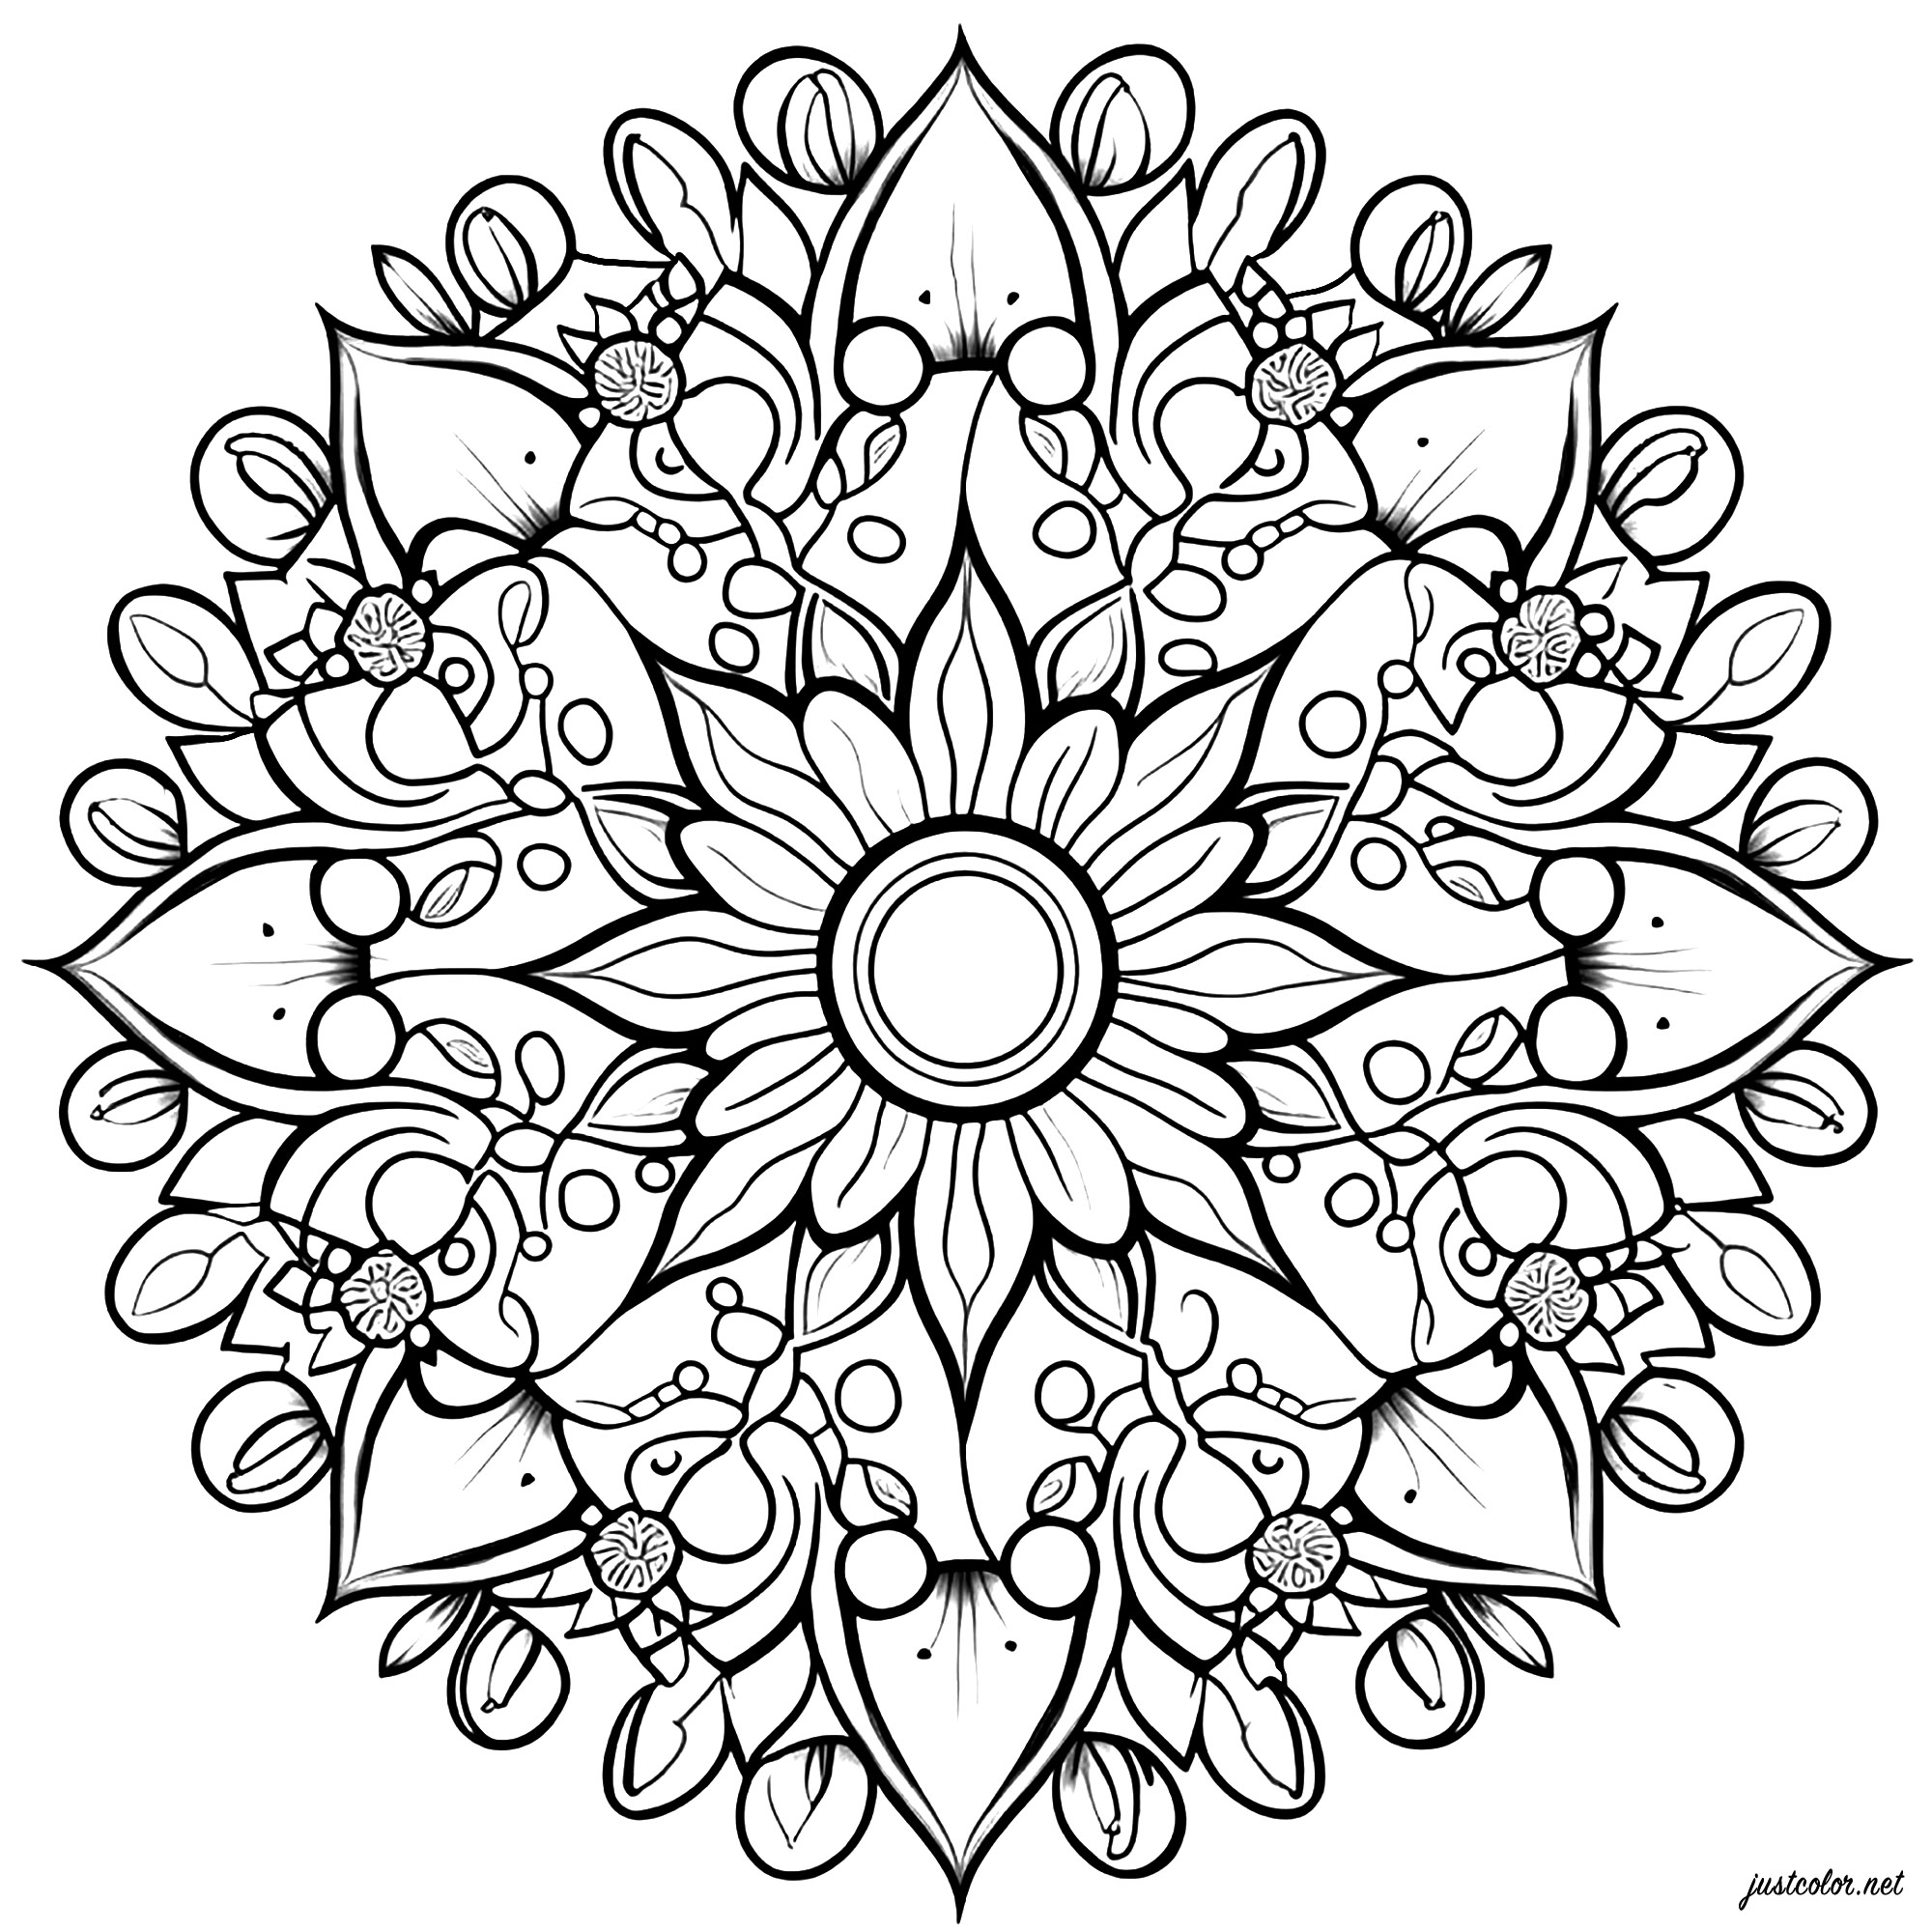 This coloring is a beautiful mandala with flowers and harmonious plant patterns. It is composed of several concentric zones that intersect, each consisting of flowers and leaves with delicate patterns.